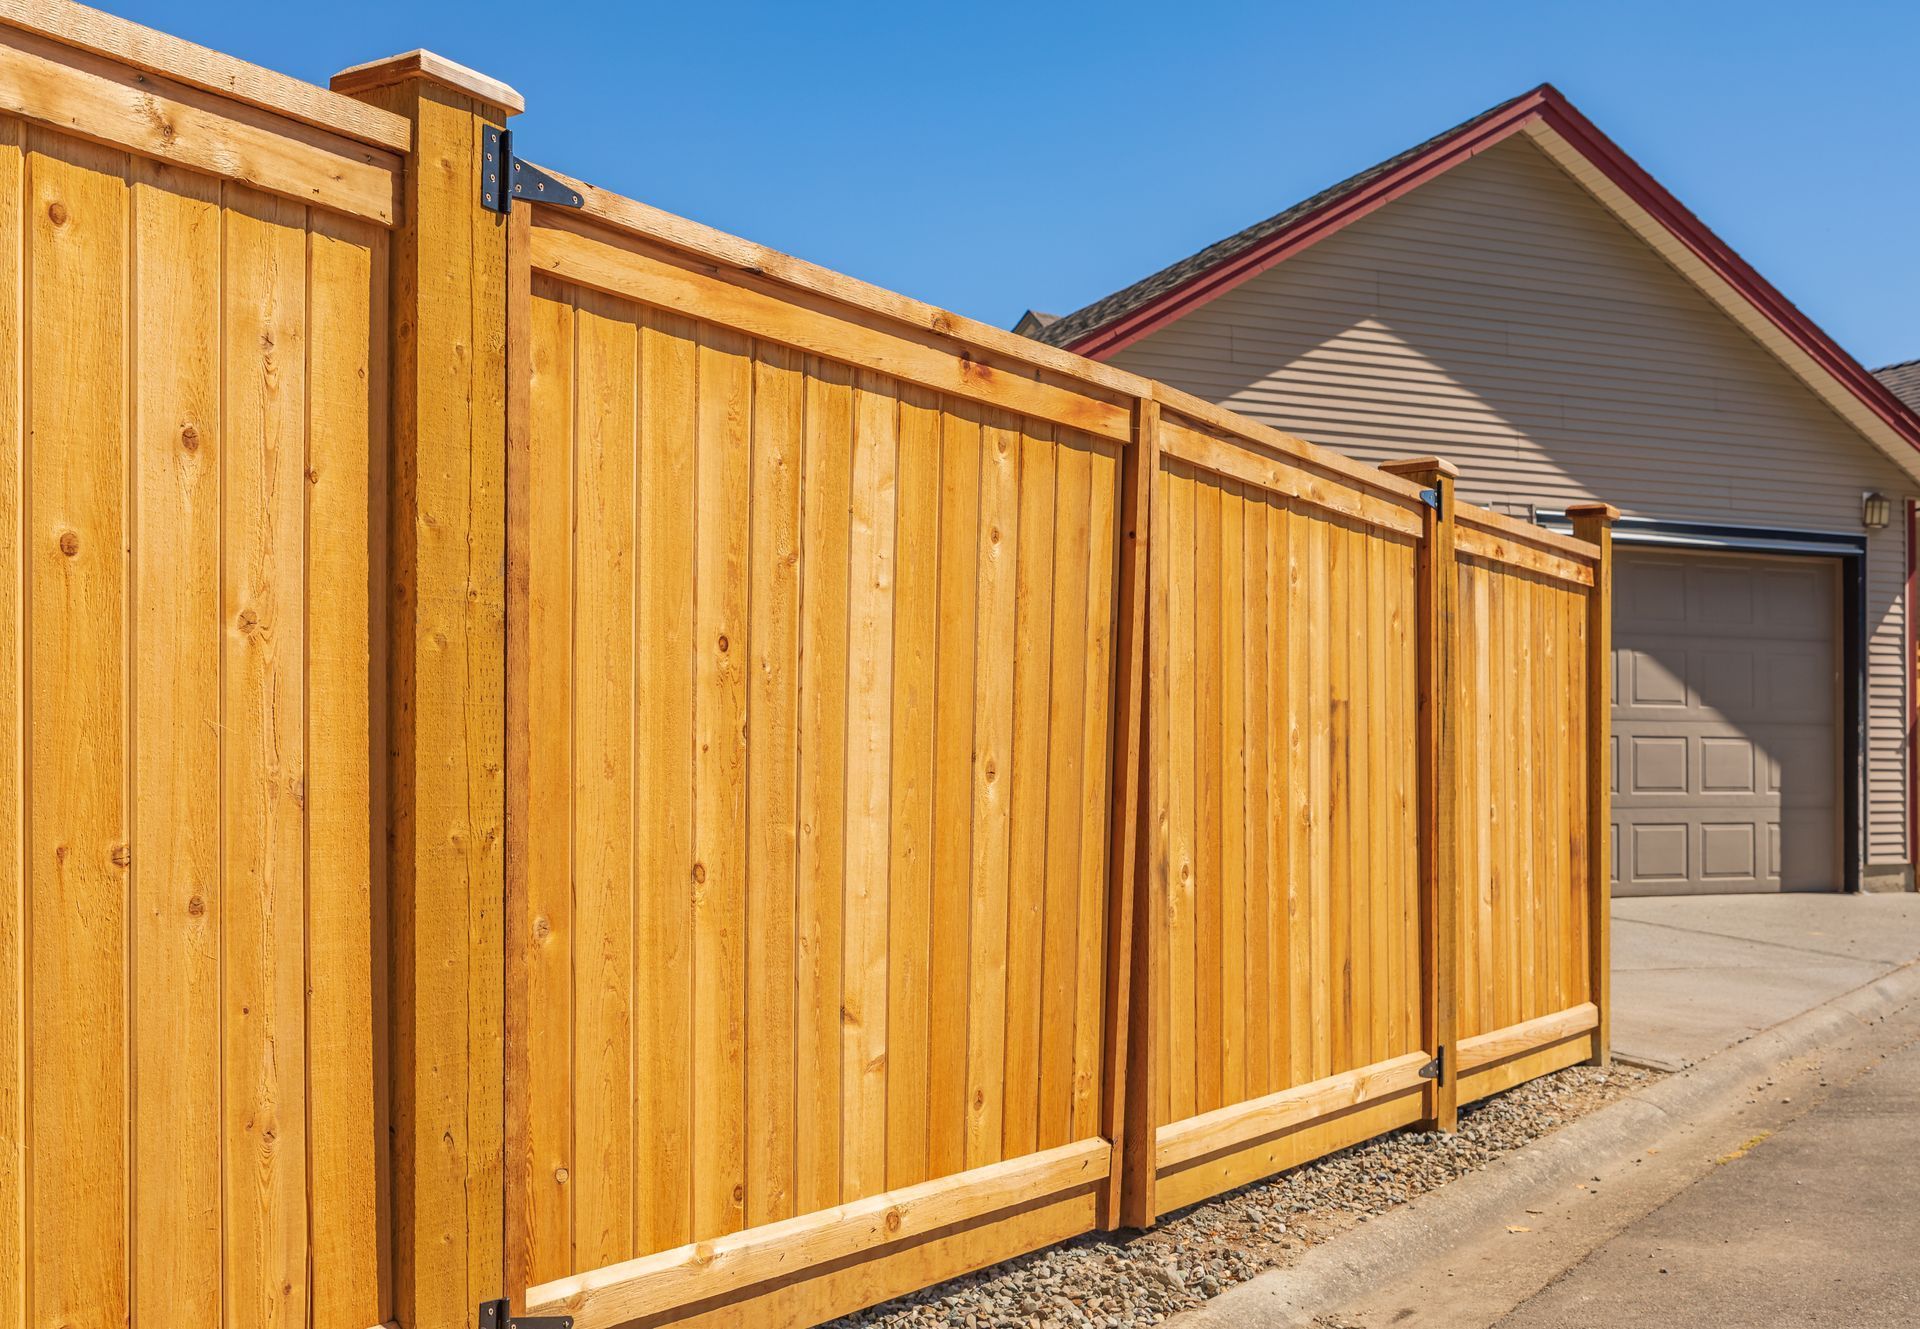 A wooden fence is in front of a house.